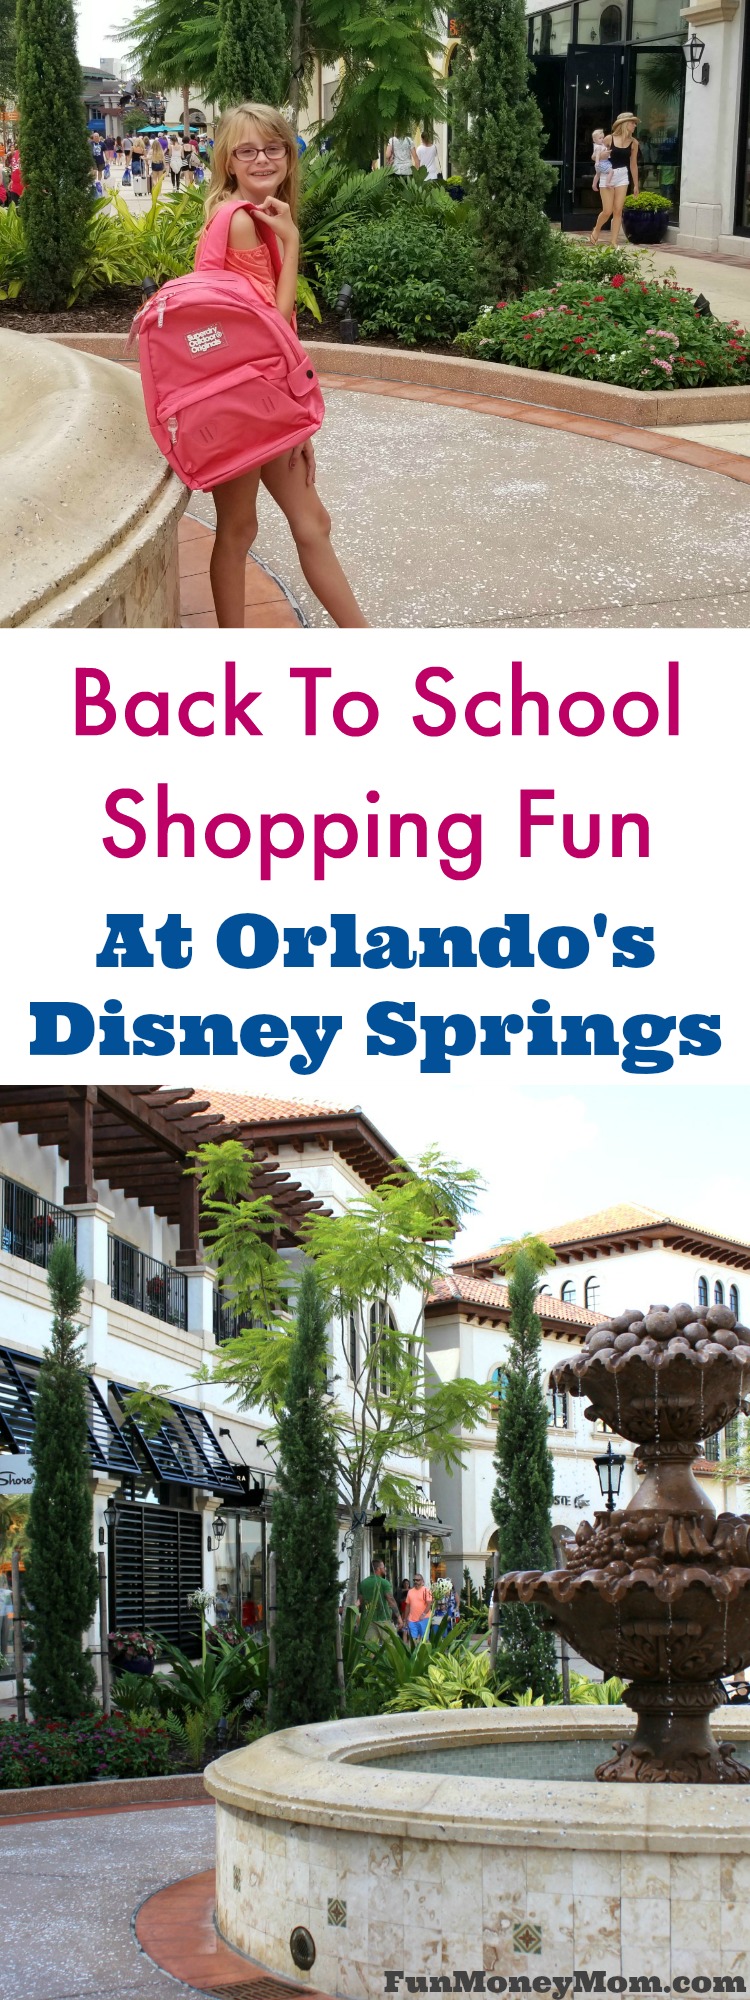 Back to school shopping is so much more fun when you do it at Disney Springs in Orlando #hosted